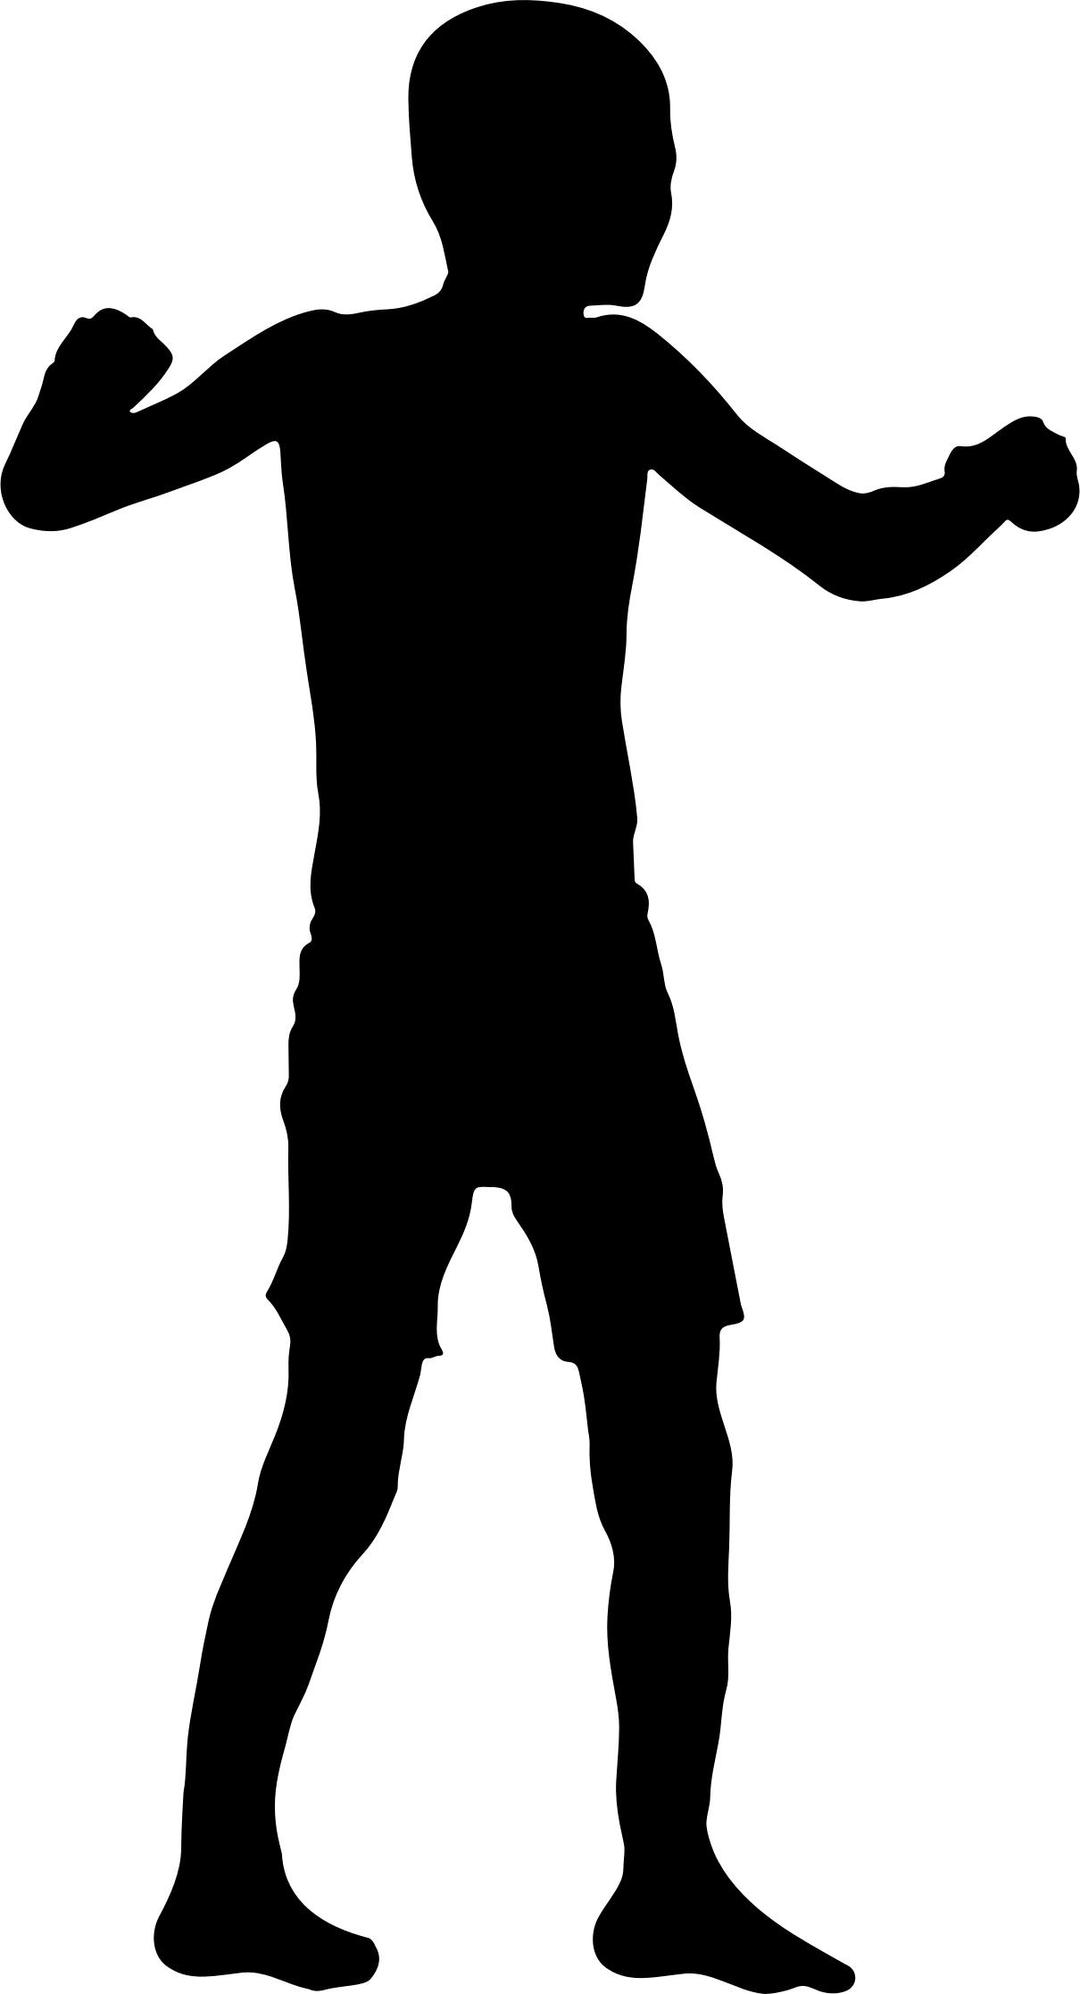 Boy At The Beach Silhouette png transparent